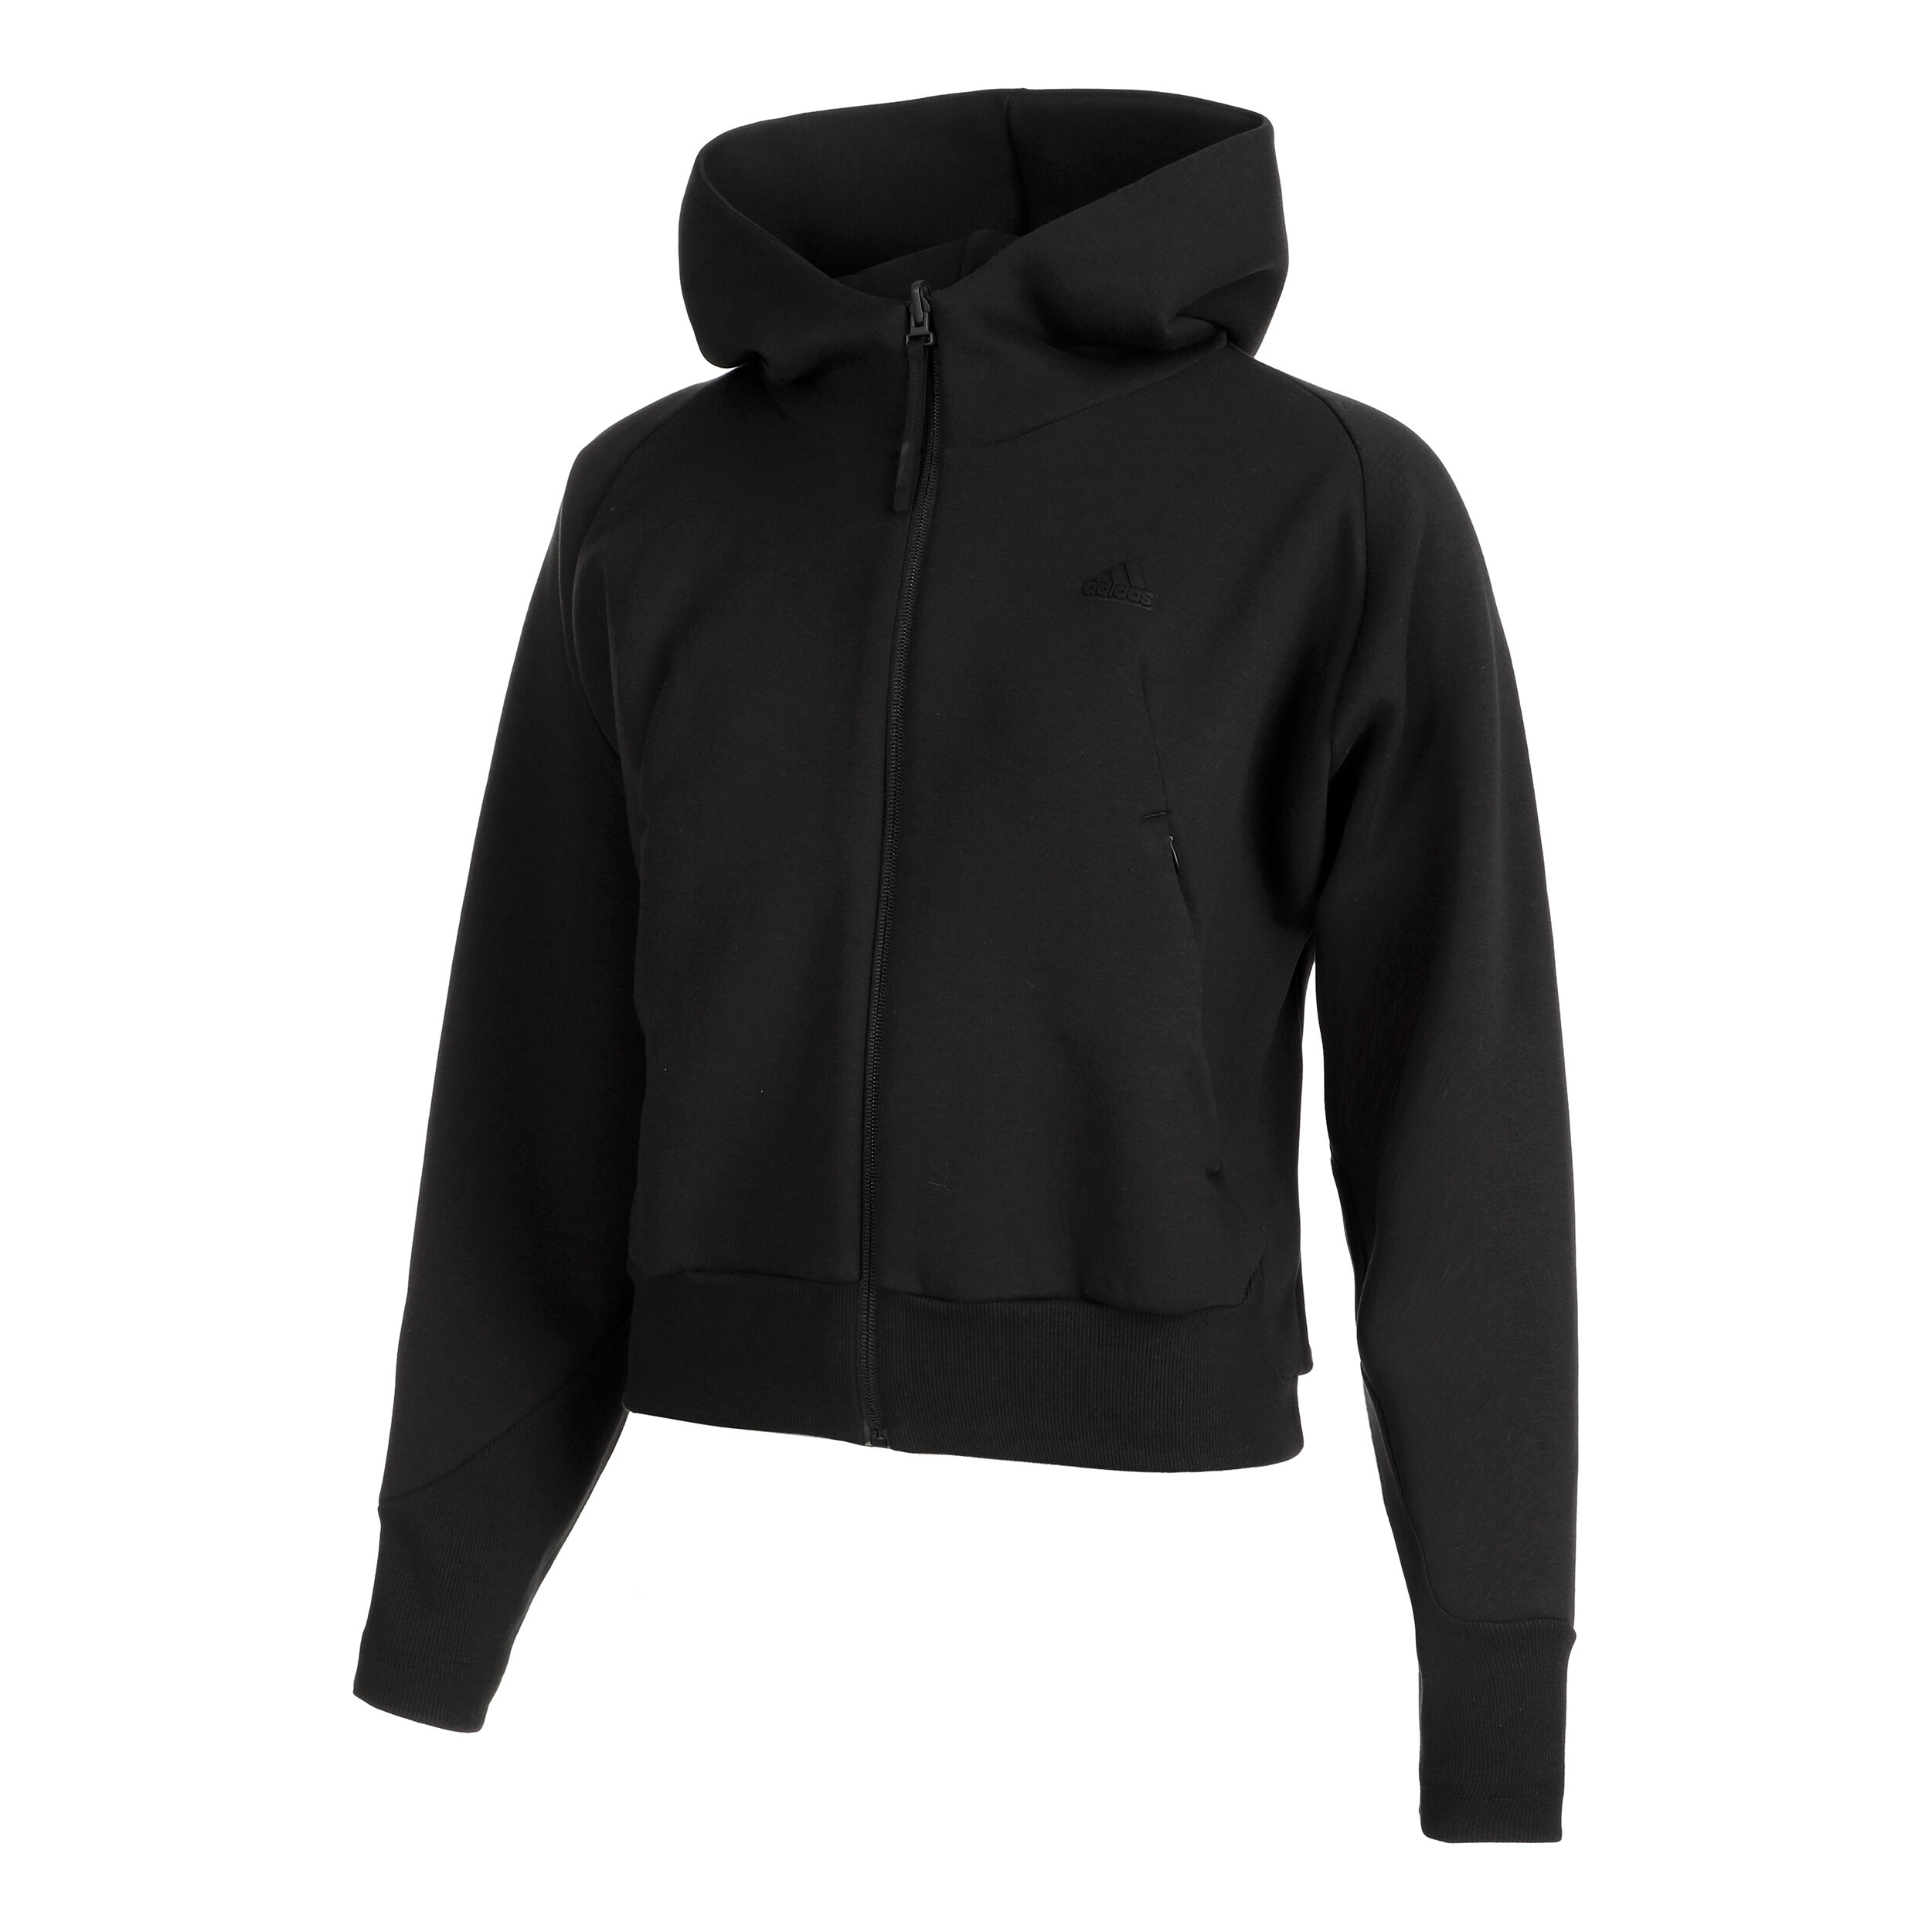 Buy Sweat jackets from adidas online | Tennis-Point